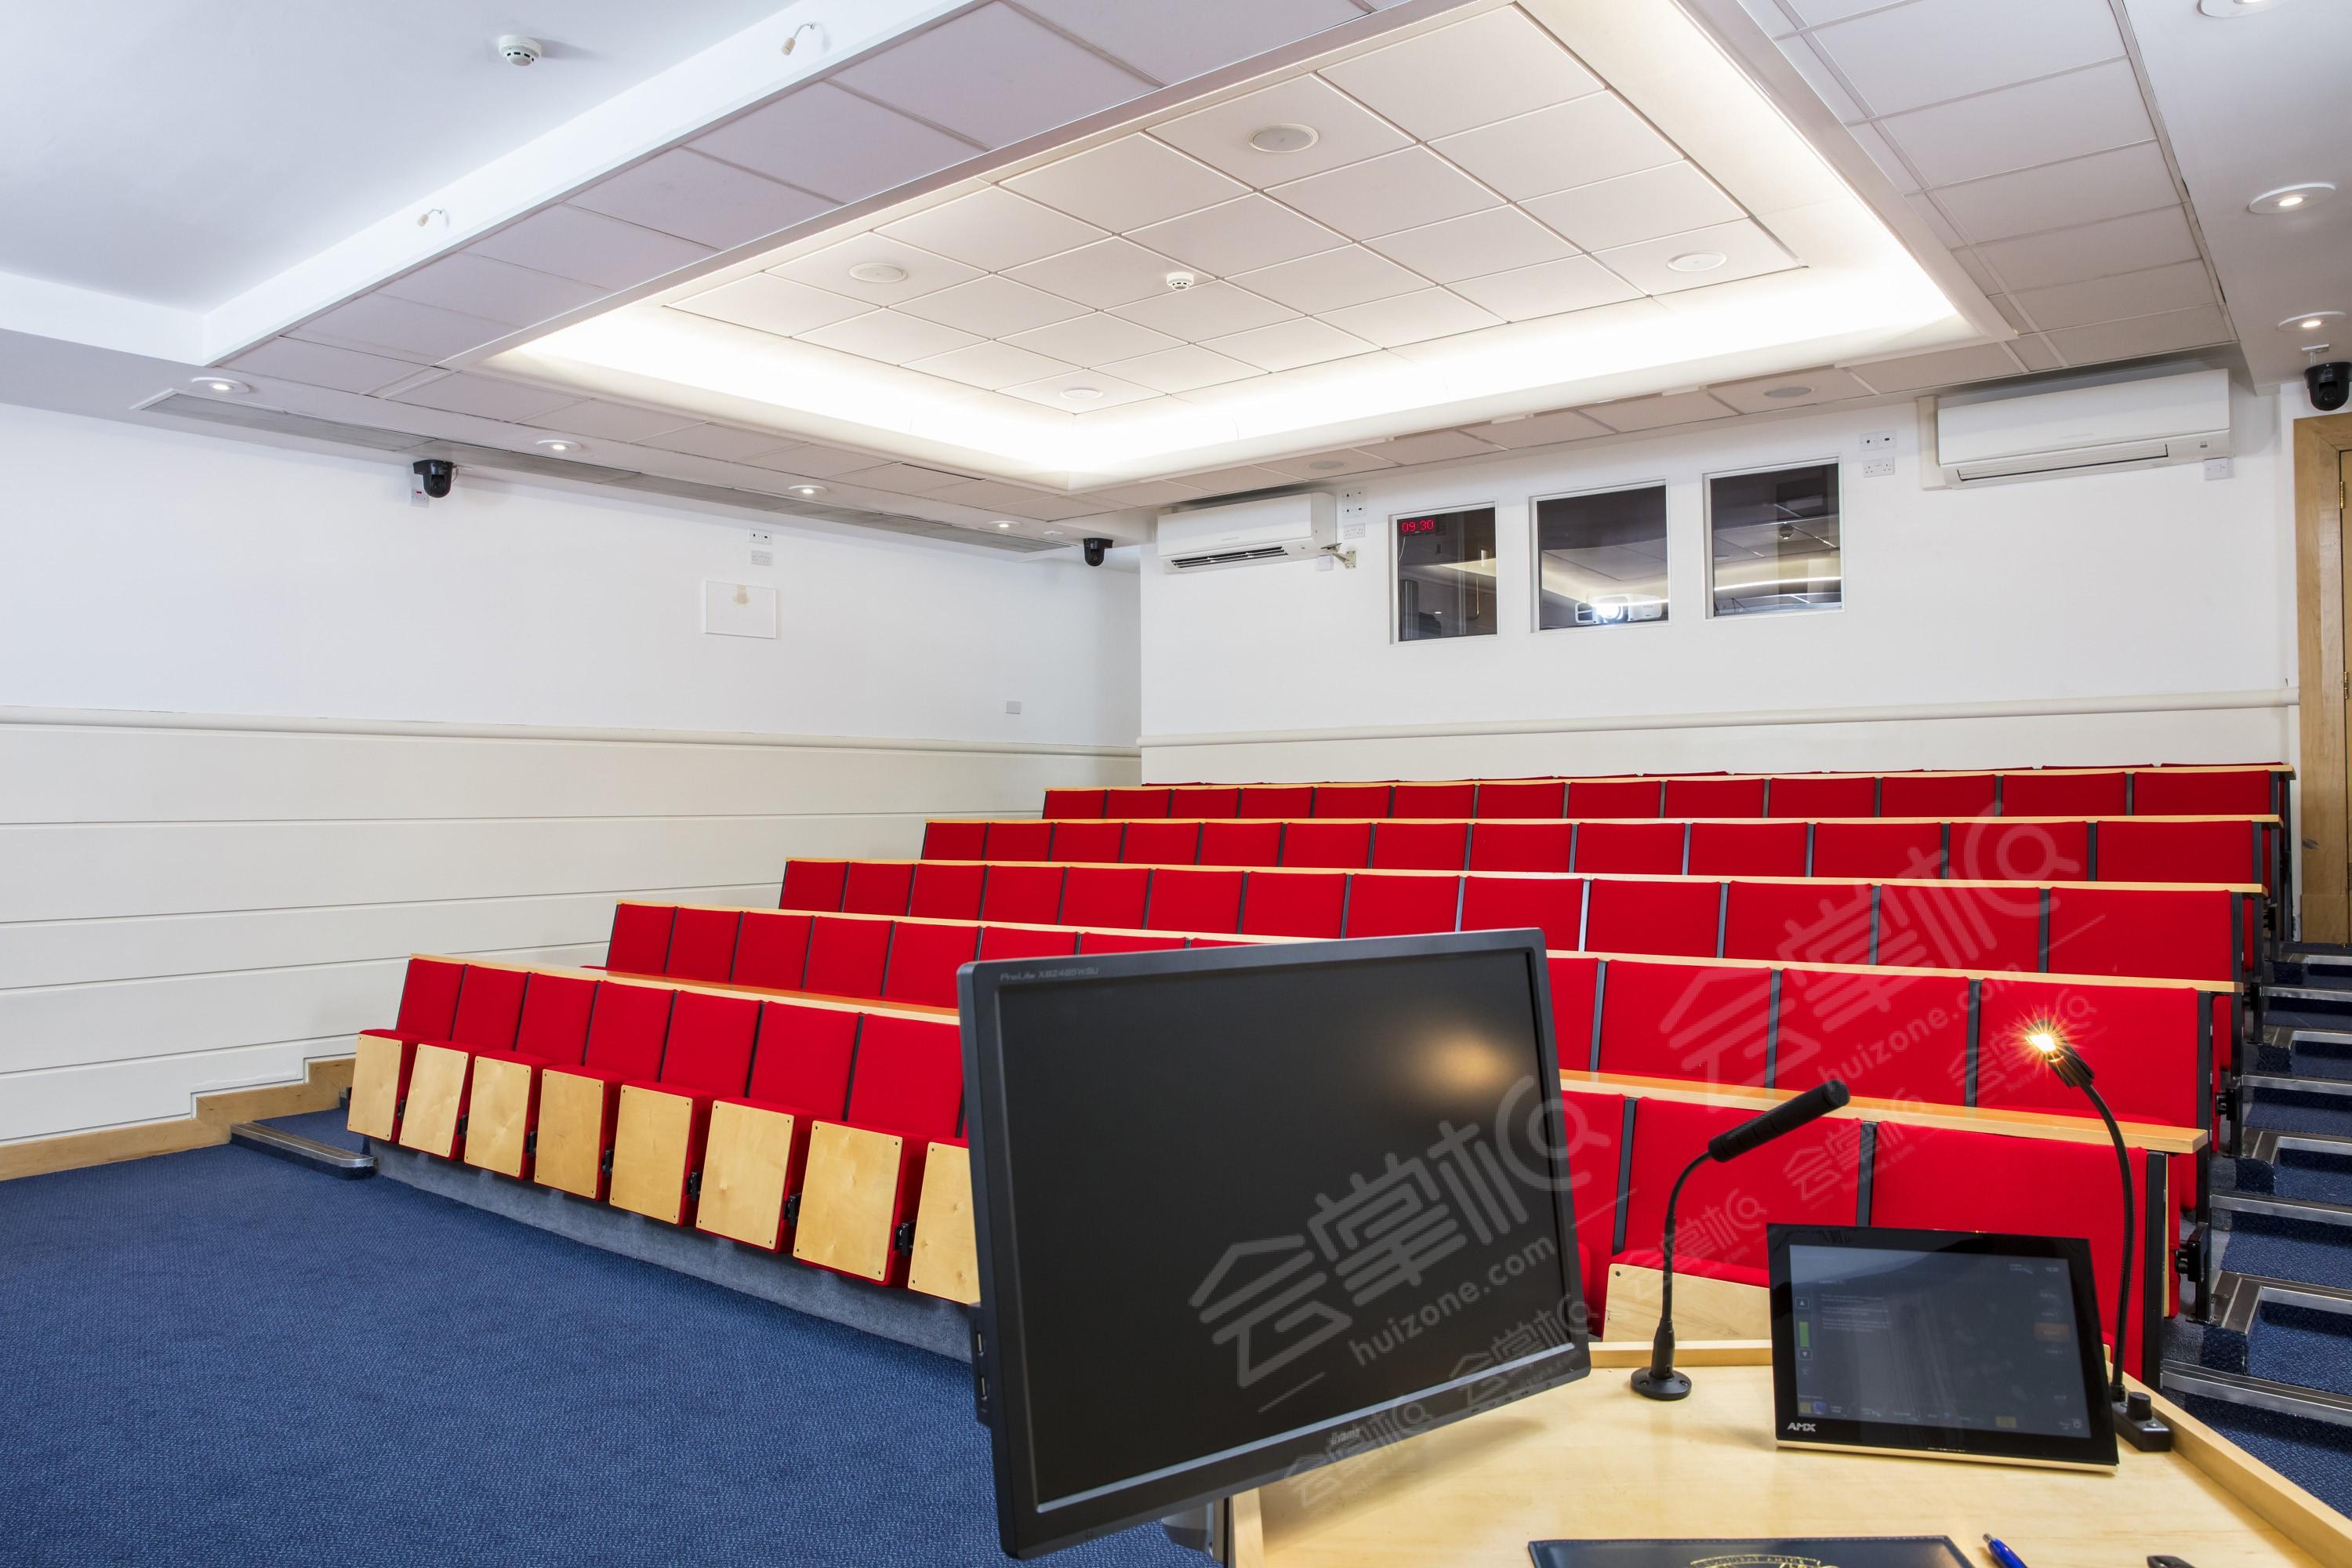 The Peter Lowe Lecture Theatre